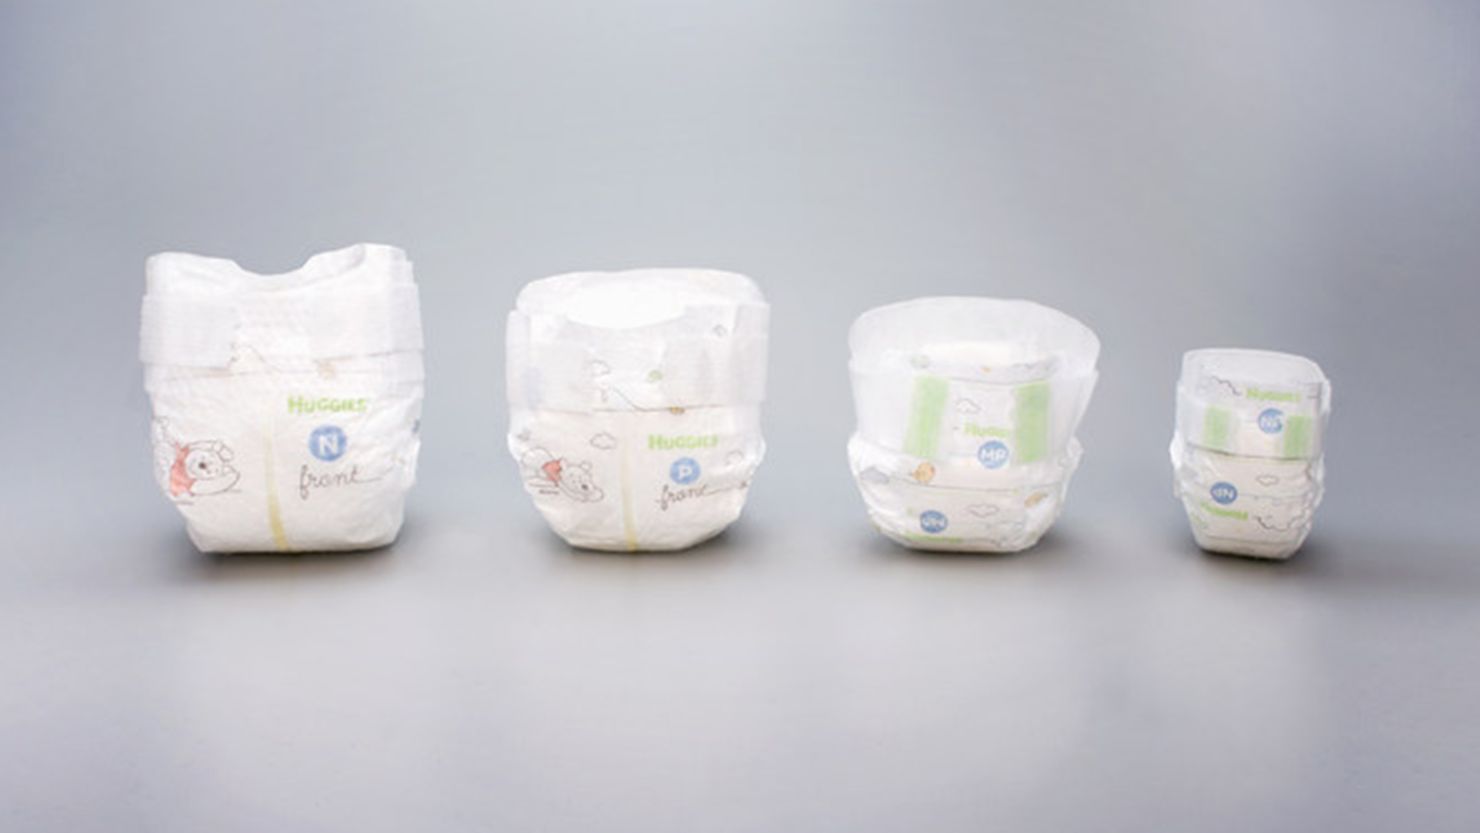 These tiny diapers fit babies less than 2 pounds